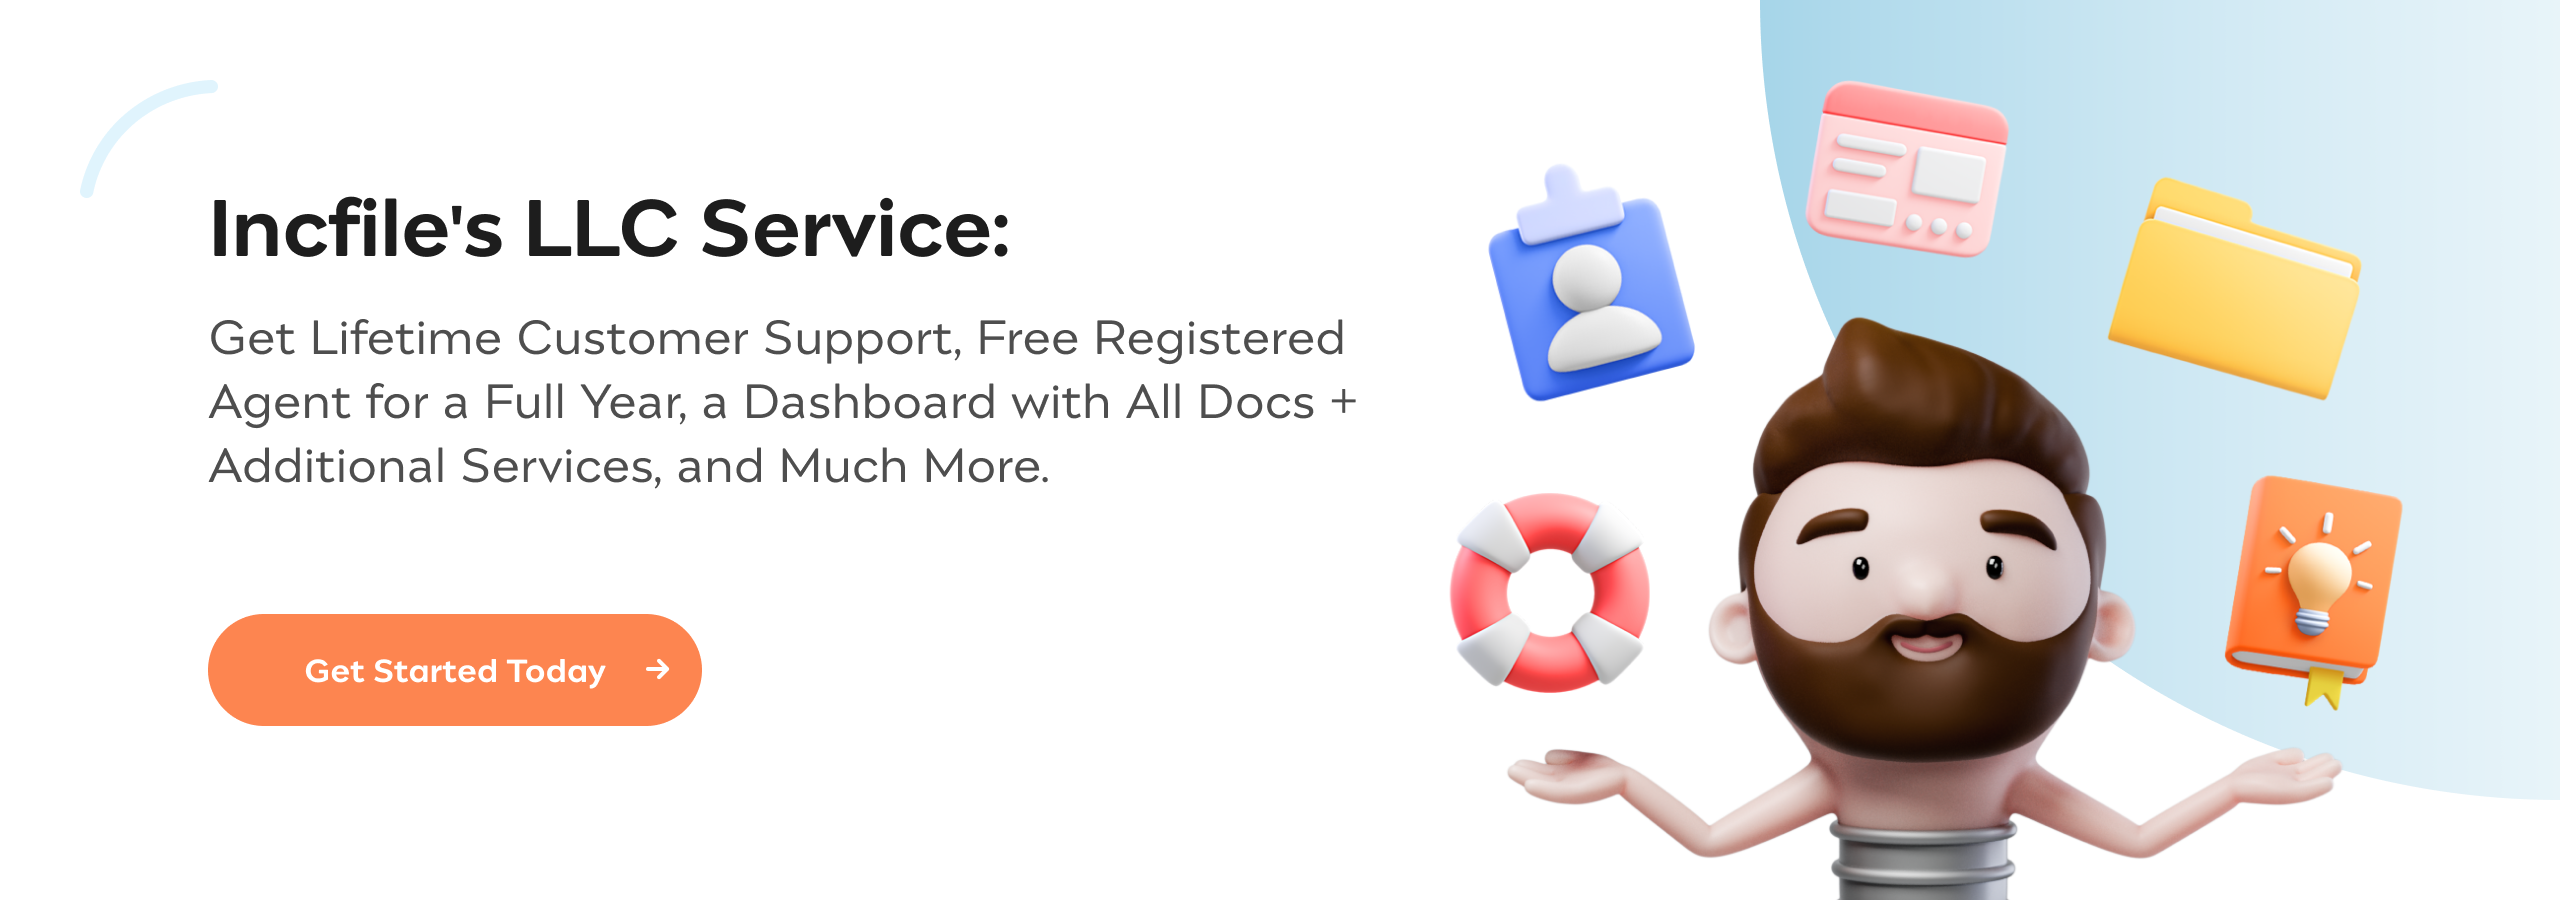 Infile's LLC Service: Get Lifetime Customer Support, Free Registered Agent for a Full Year, a Dashboard with All Docs + Additional Services, and Much More.